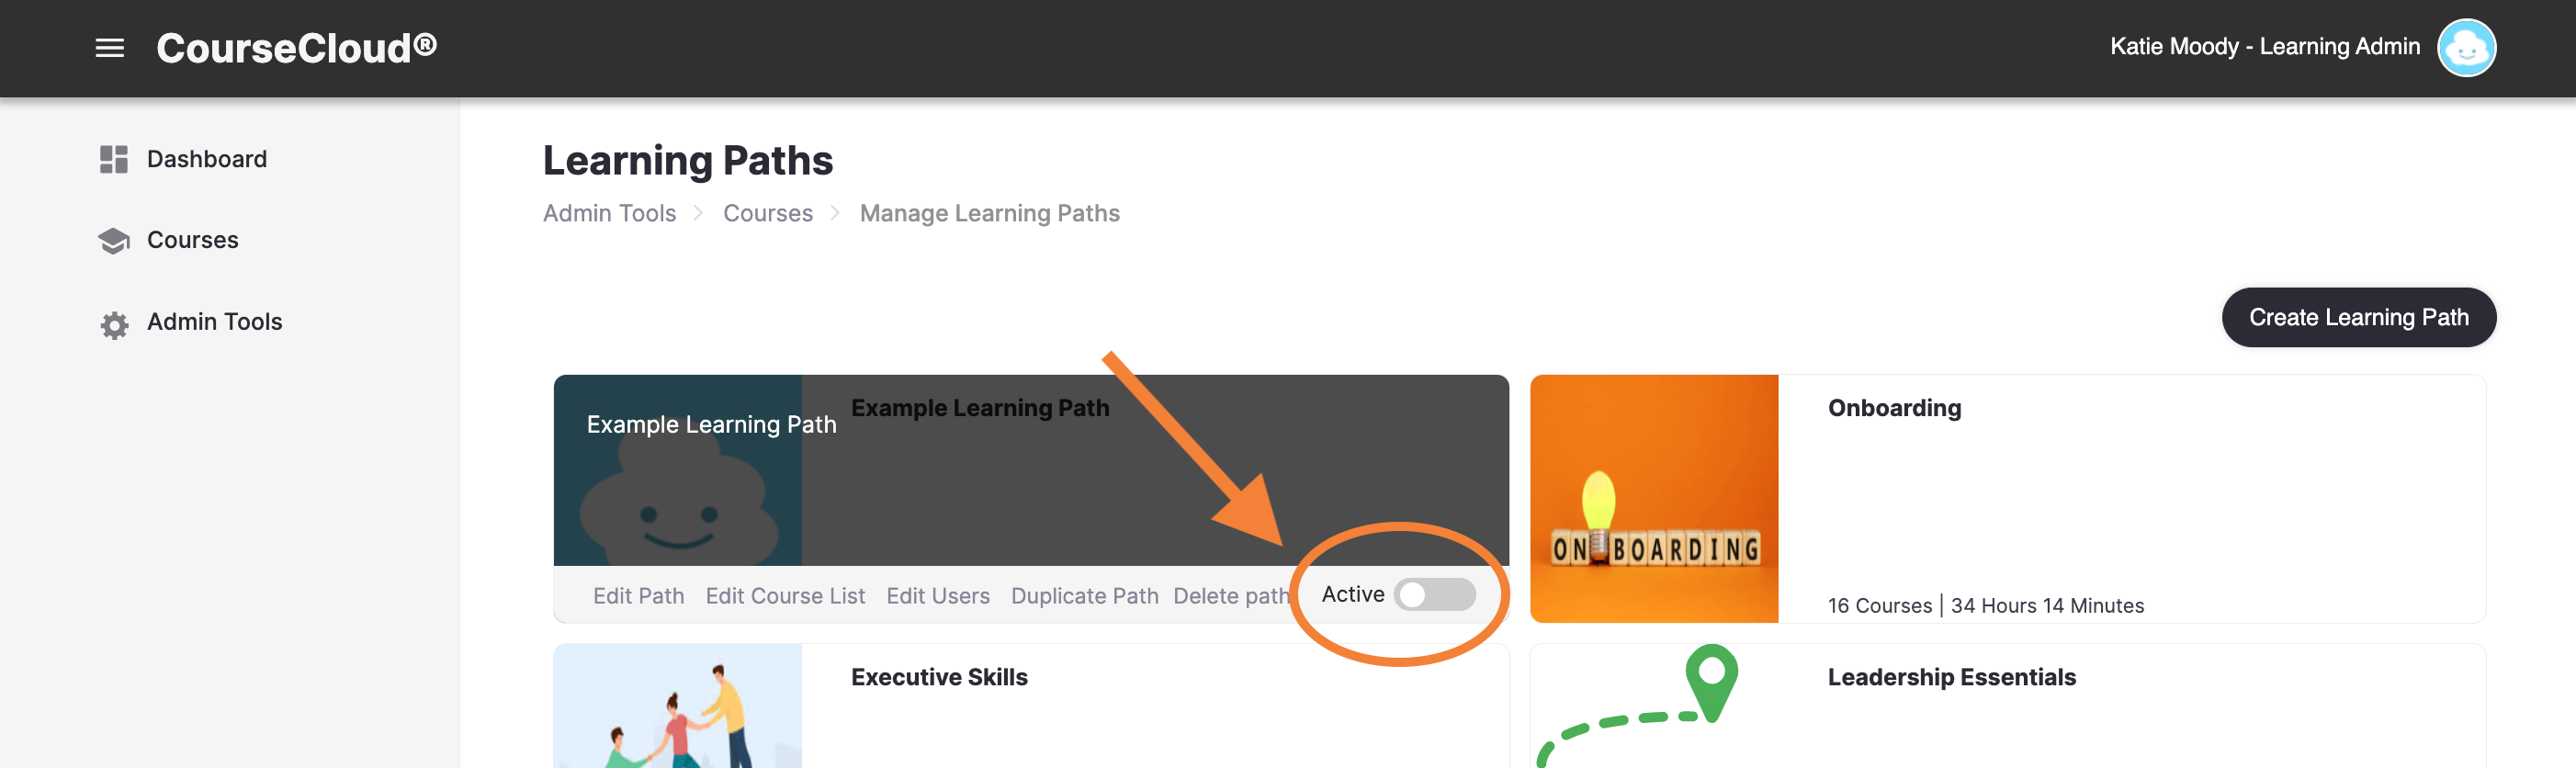 8_-_The_Learning_Paths_page__with_an_Active_toggle_indicated_II.png